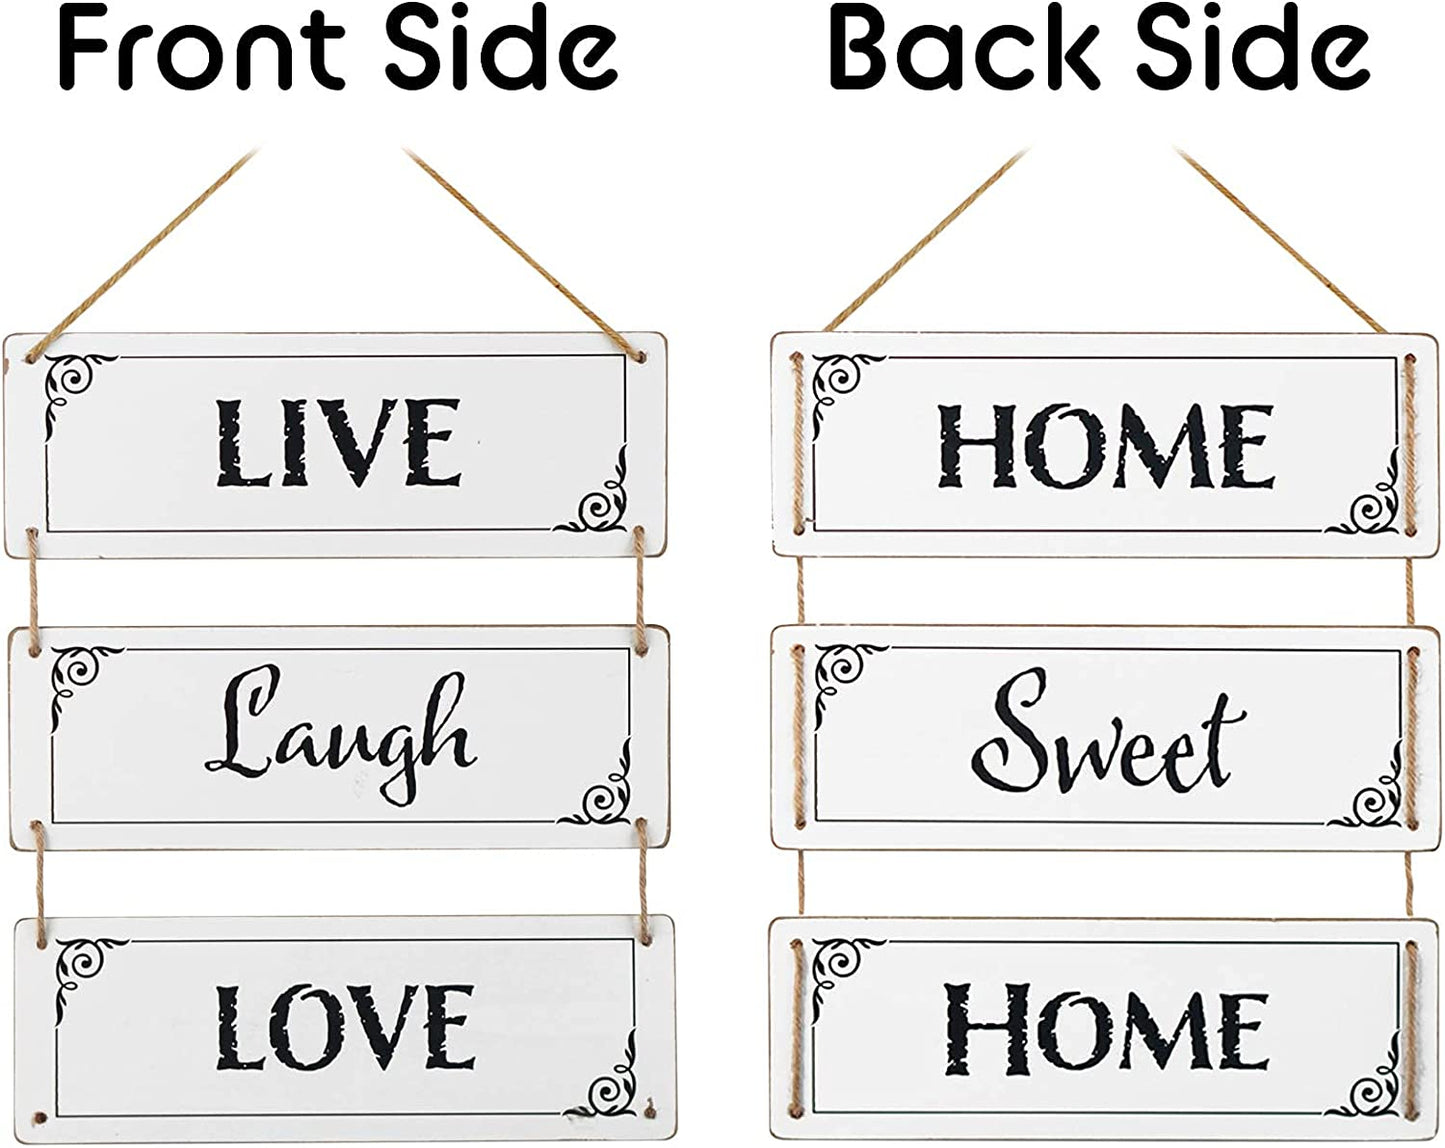 Reversible Wood Wall Hanging Sign for Farmhouse and Living Room, Rustic Wood Wall Decor Accessories for Bedroom Office Bar, Decorative Vertical Wall Plaque (Live Laugh Love)